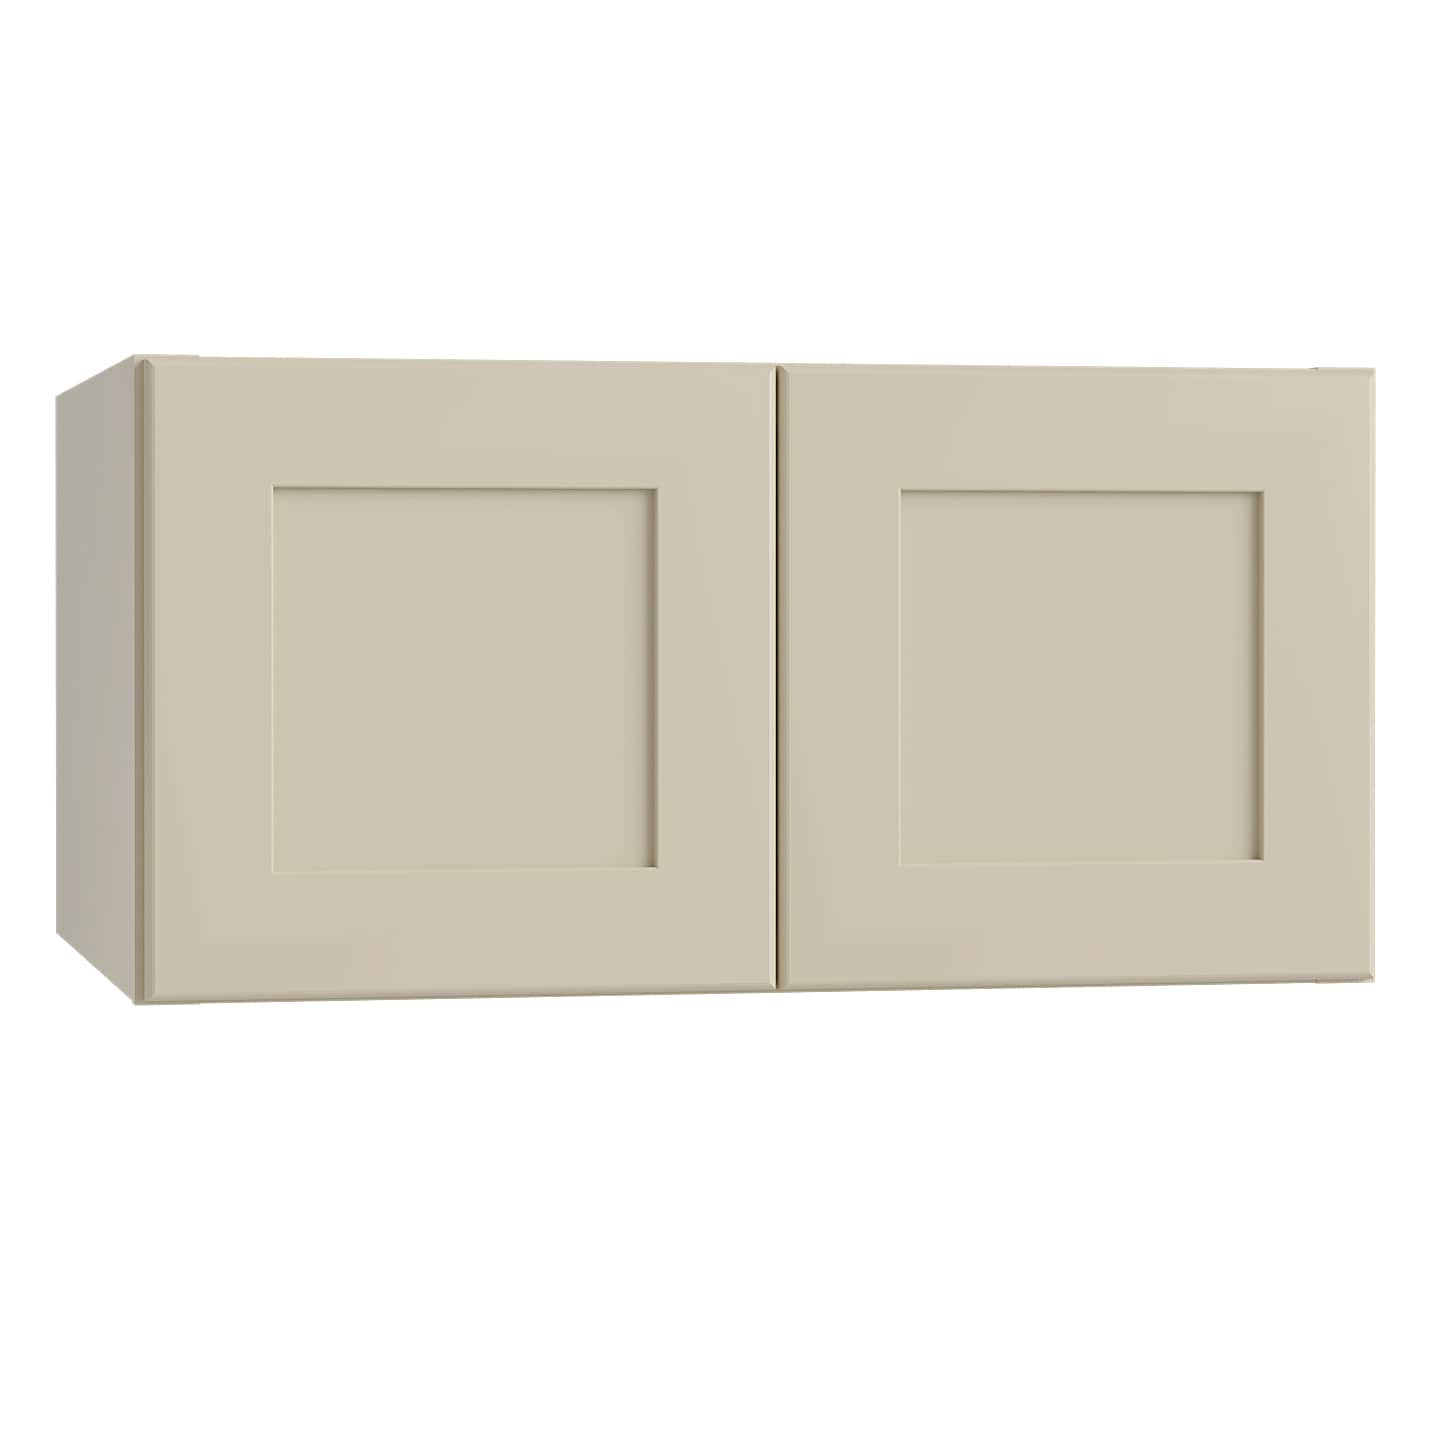 Luxxe Cabinetry 36-in W x 15-in H x 24-in D Norfolk Blended Cream Painted Door Wall Fully Assembled Semi-custom Cabinet in Off-White | W362415-NBC